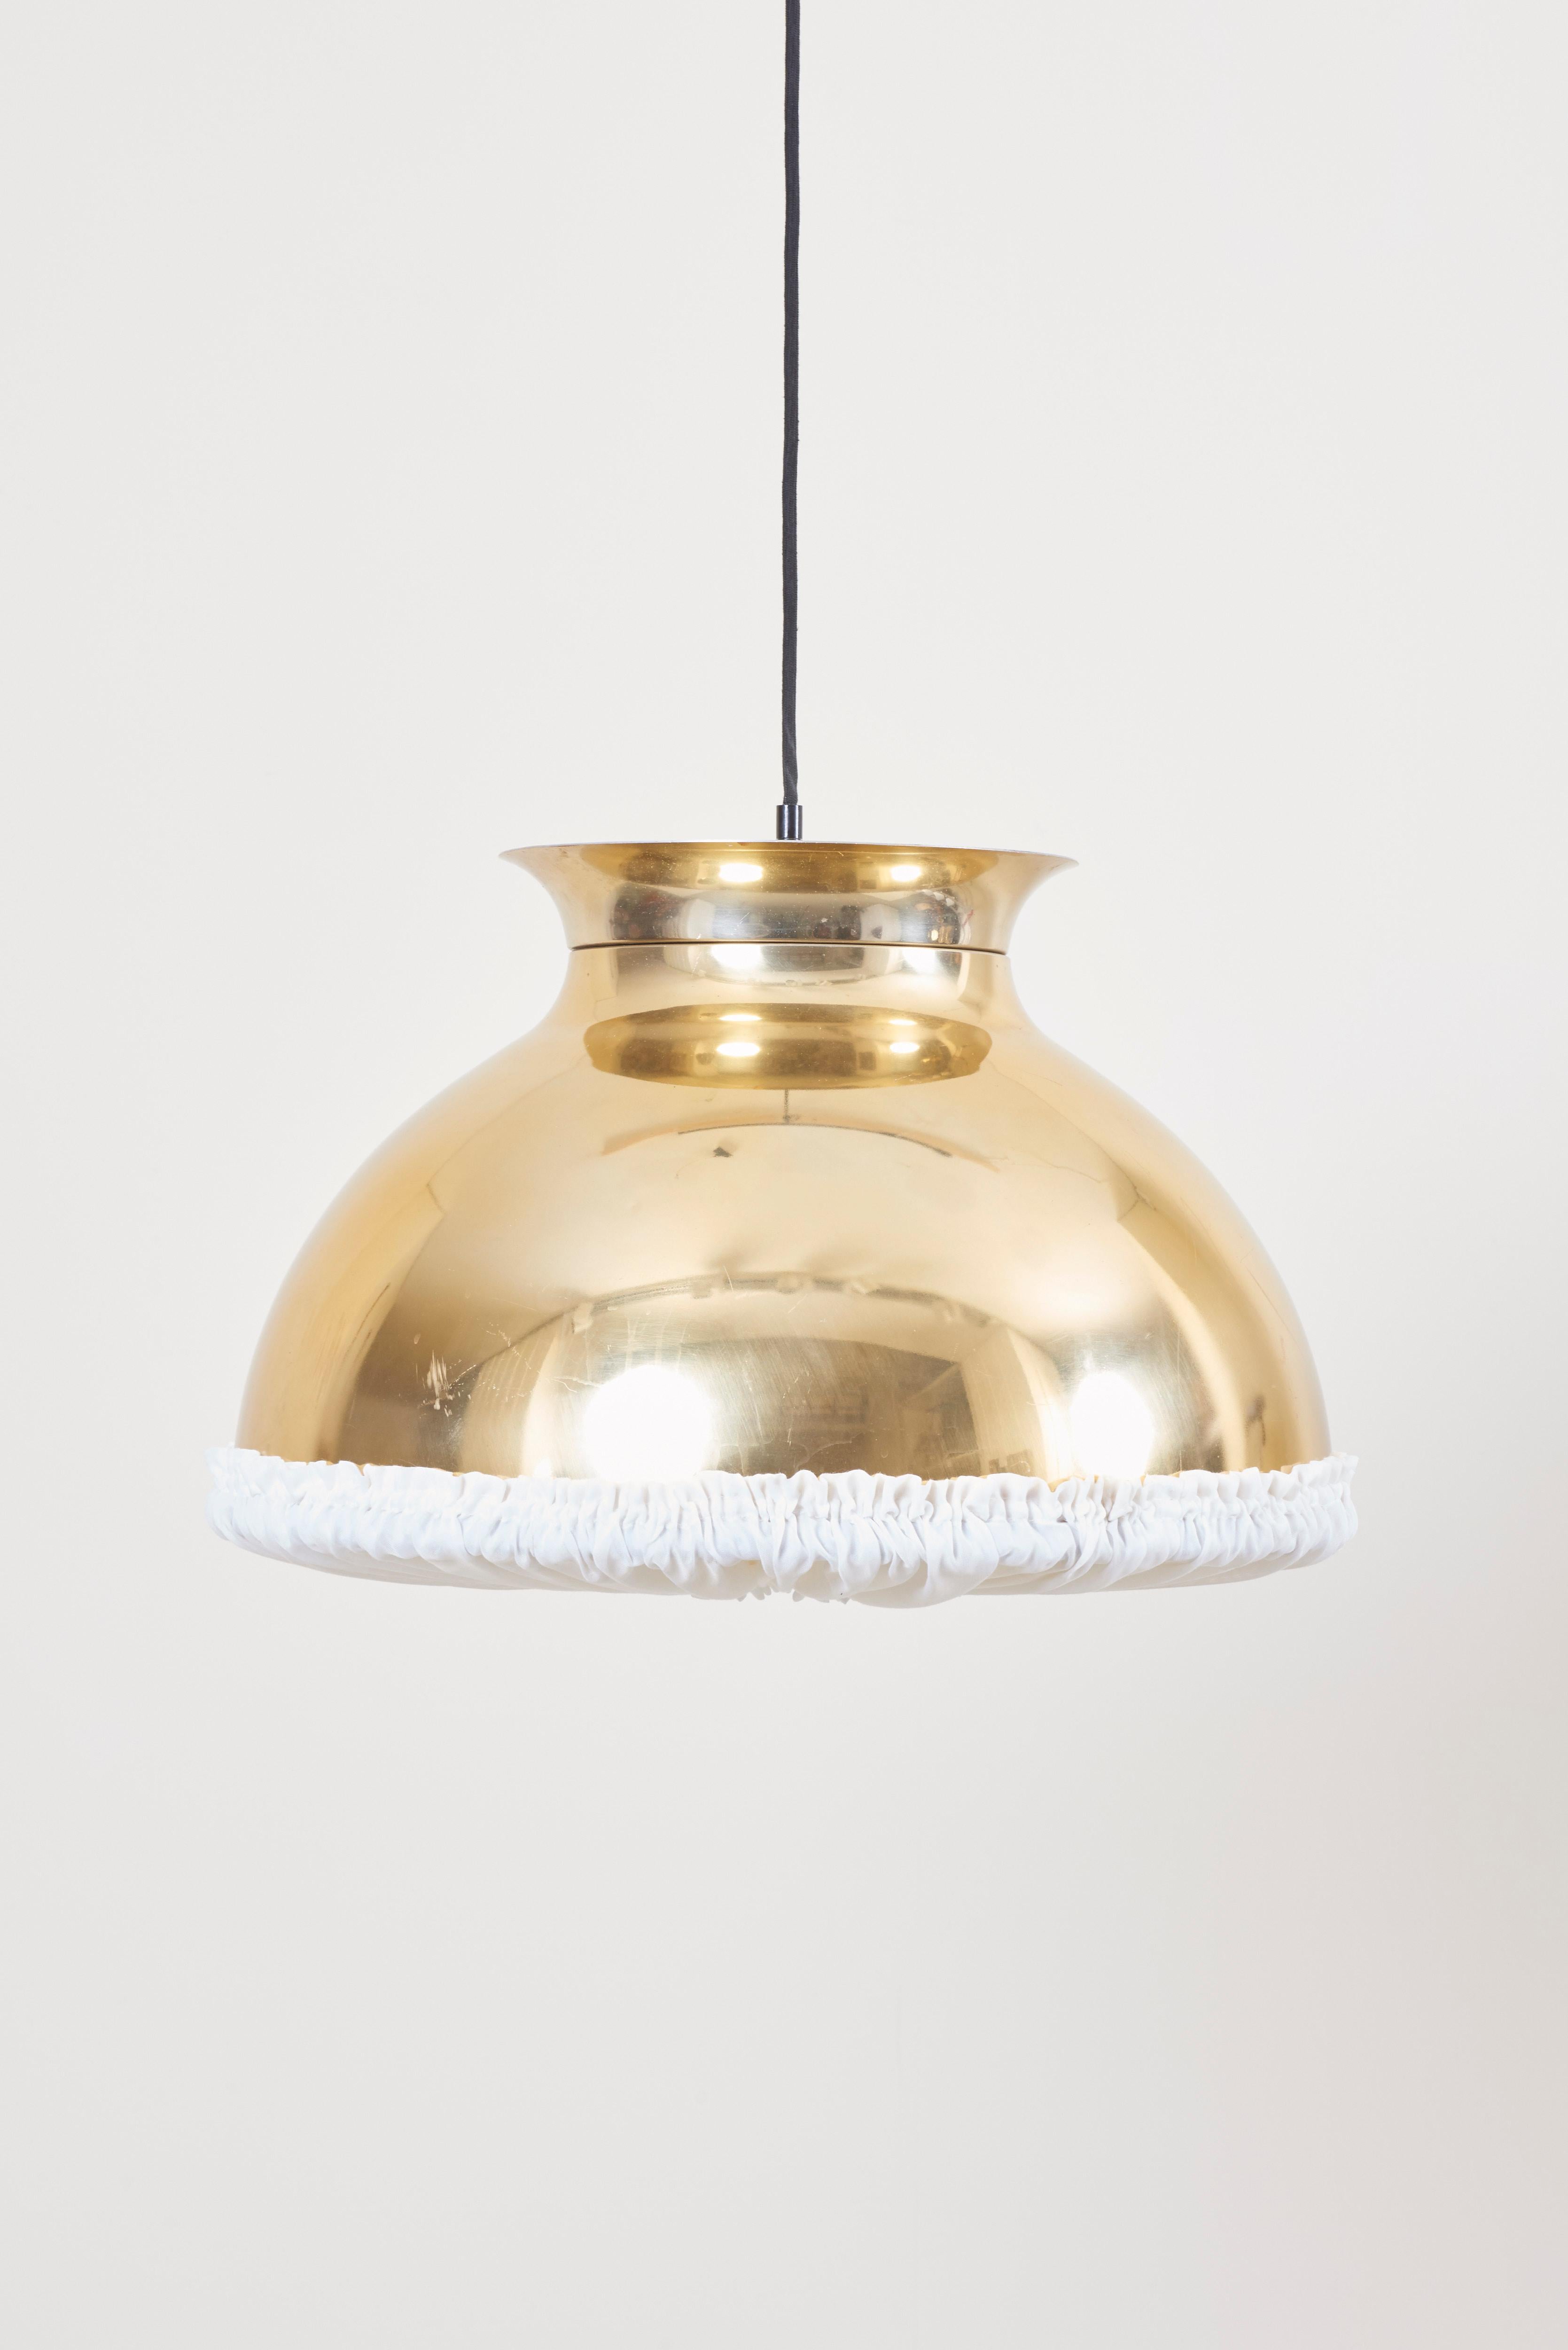 One of eight huge gold-colored pendant lamps with fabric.

The lamps should be checked locally by a specialist concerning local requirements.